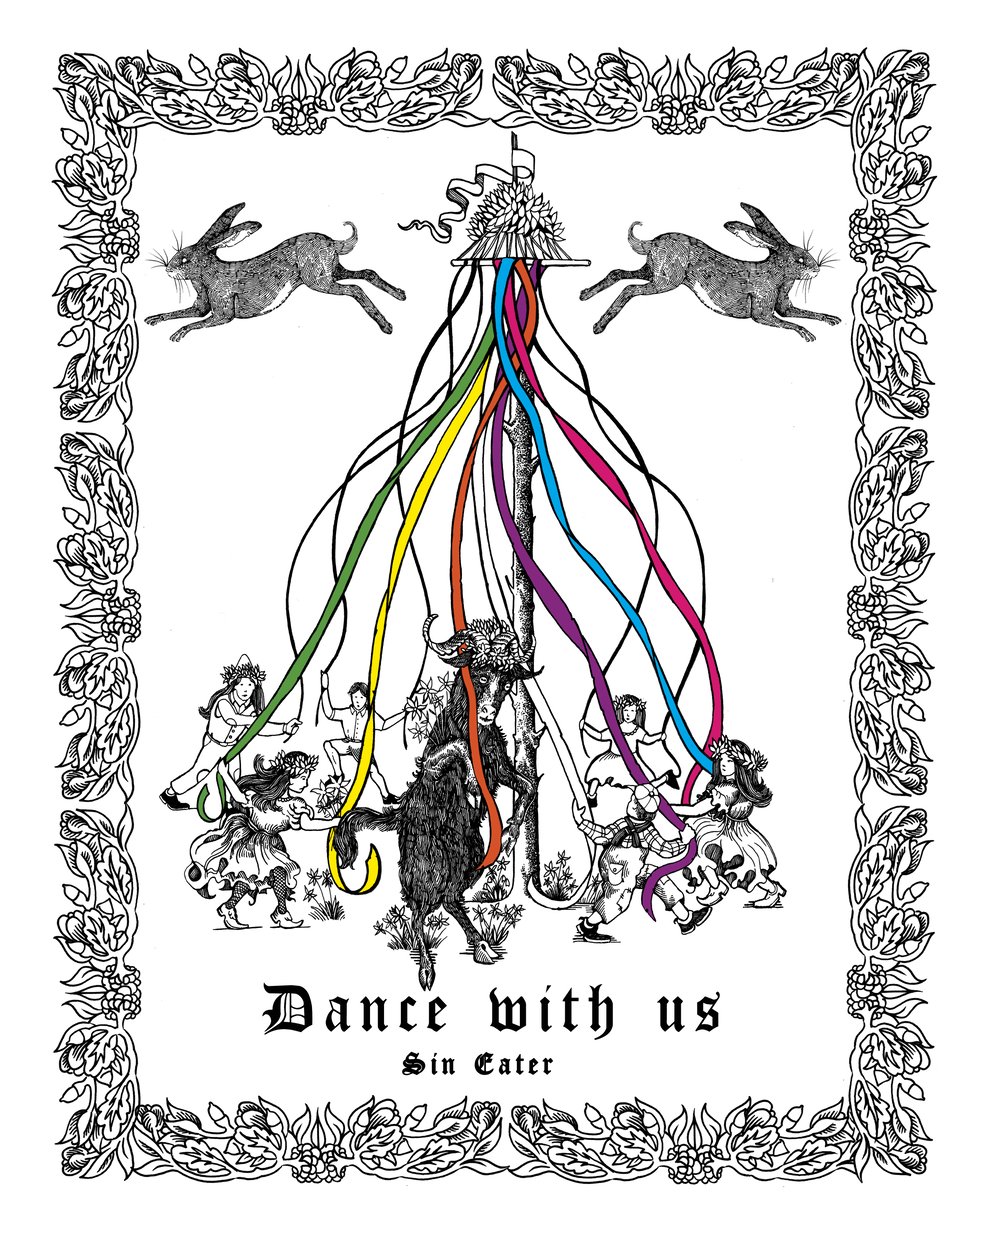 Dance with us limited edition screen print